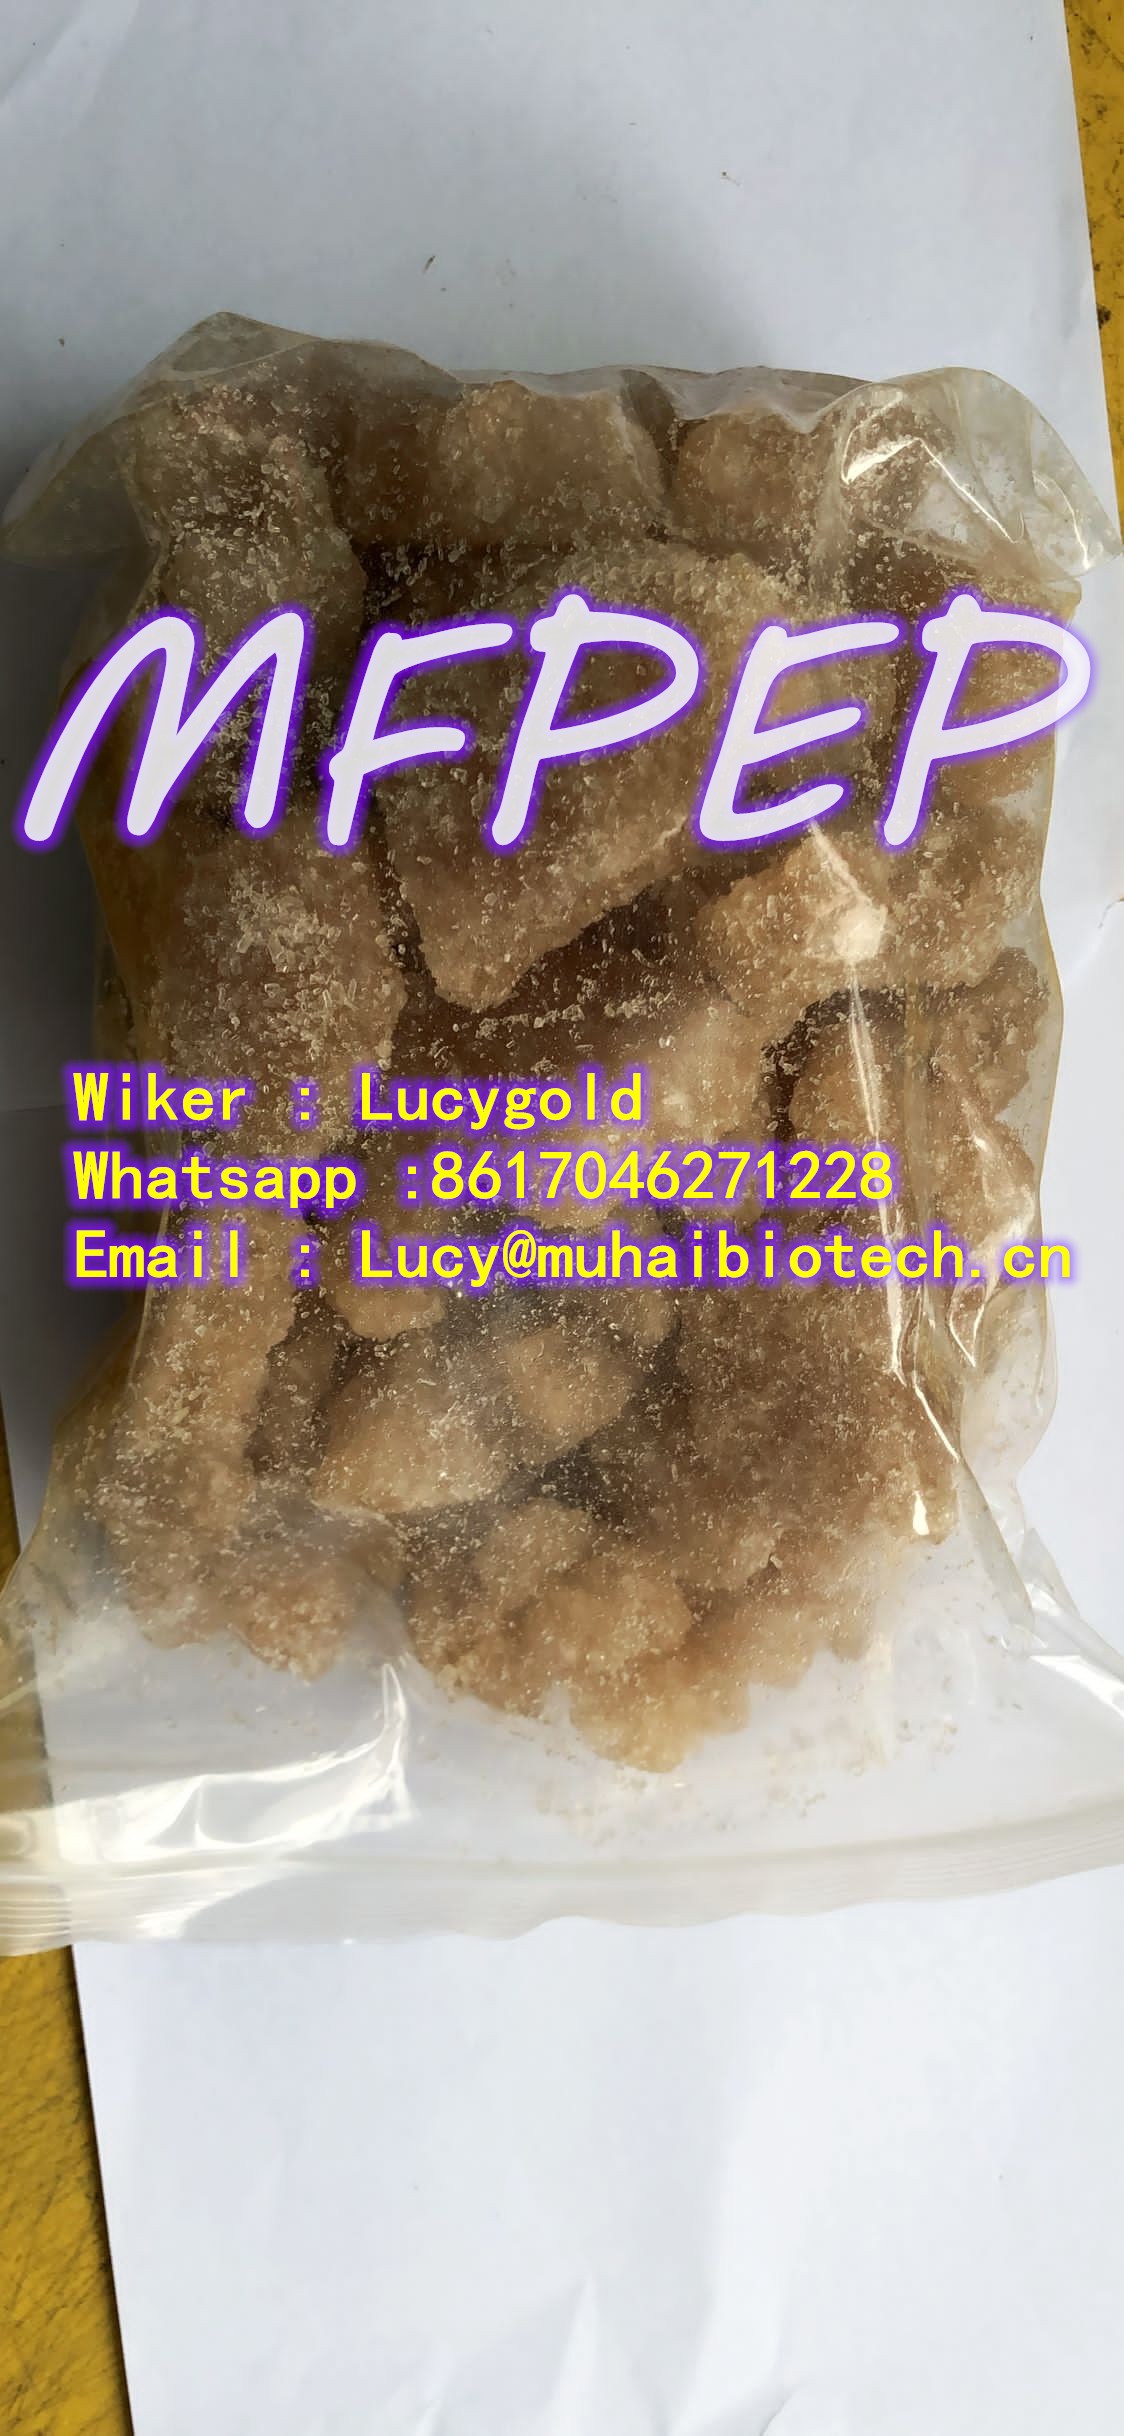 mcpep mdpep mfpep 10 samples 7 days delivery time to US